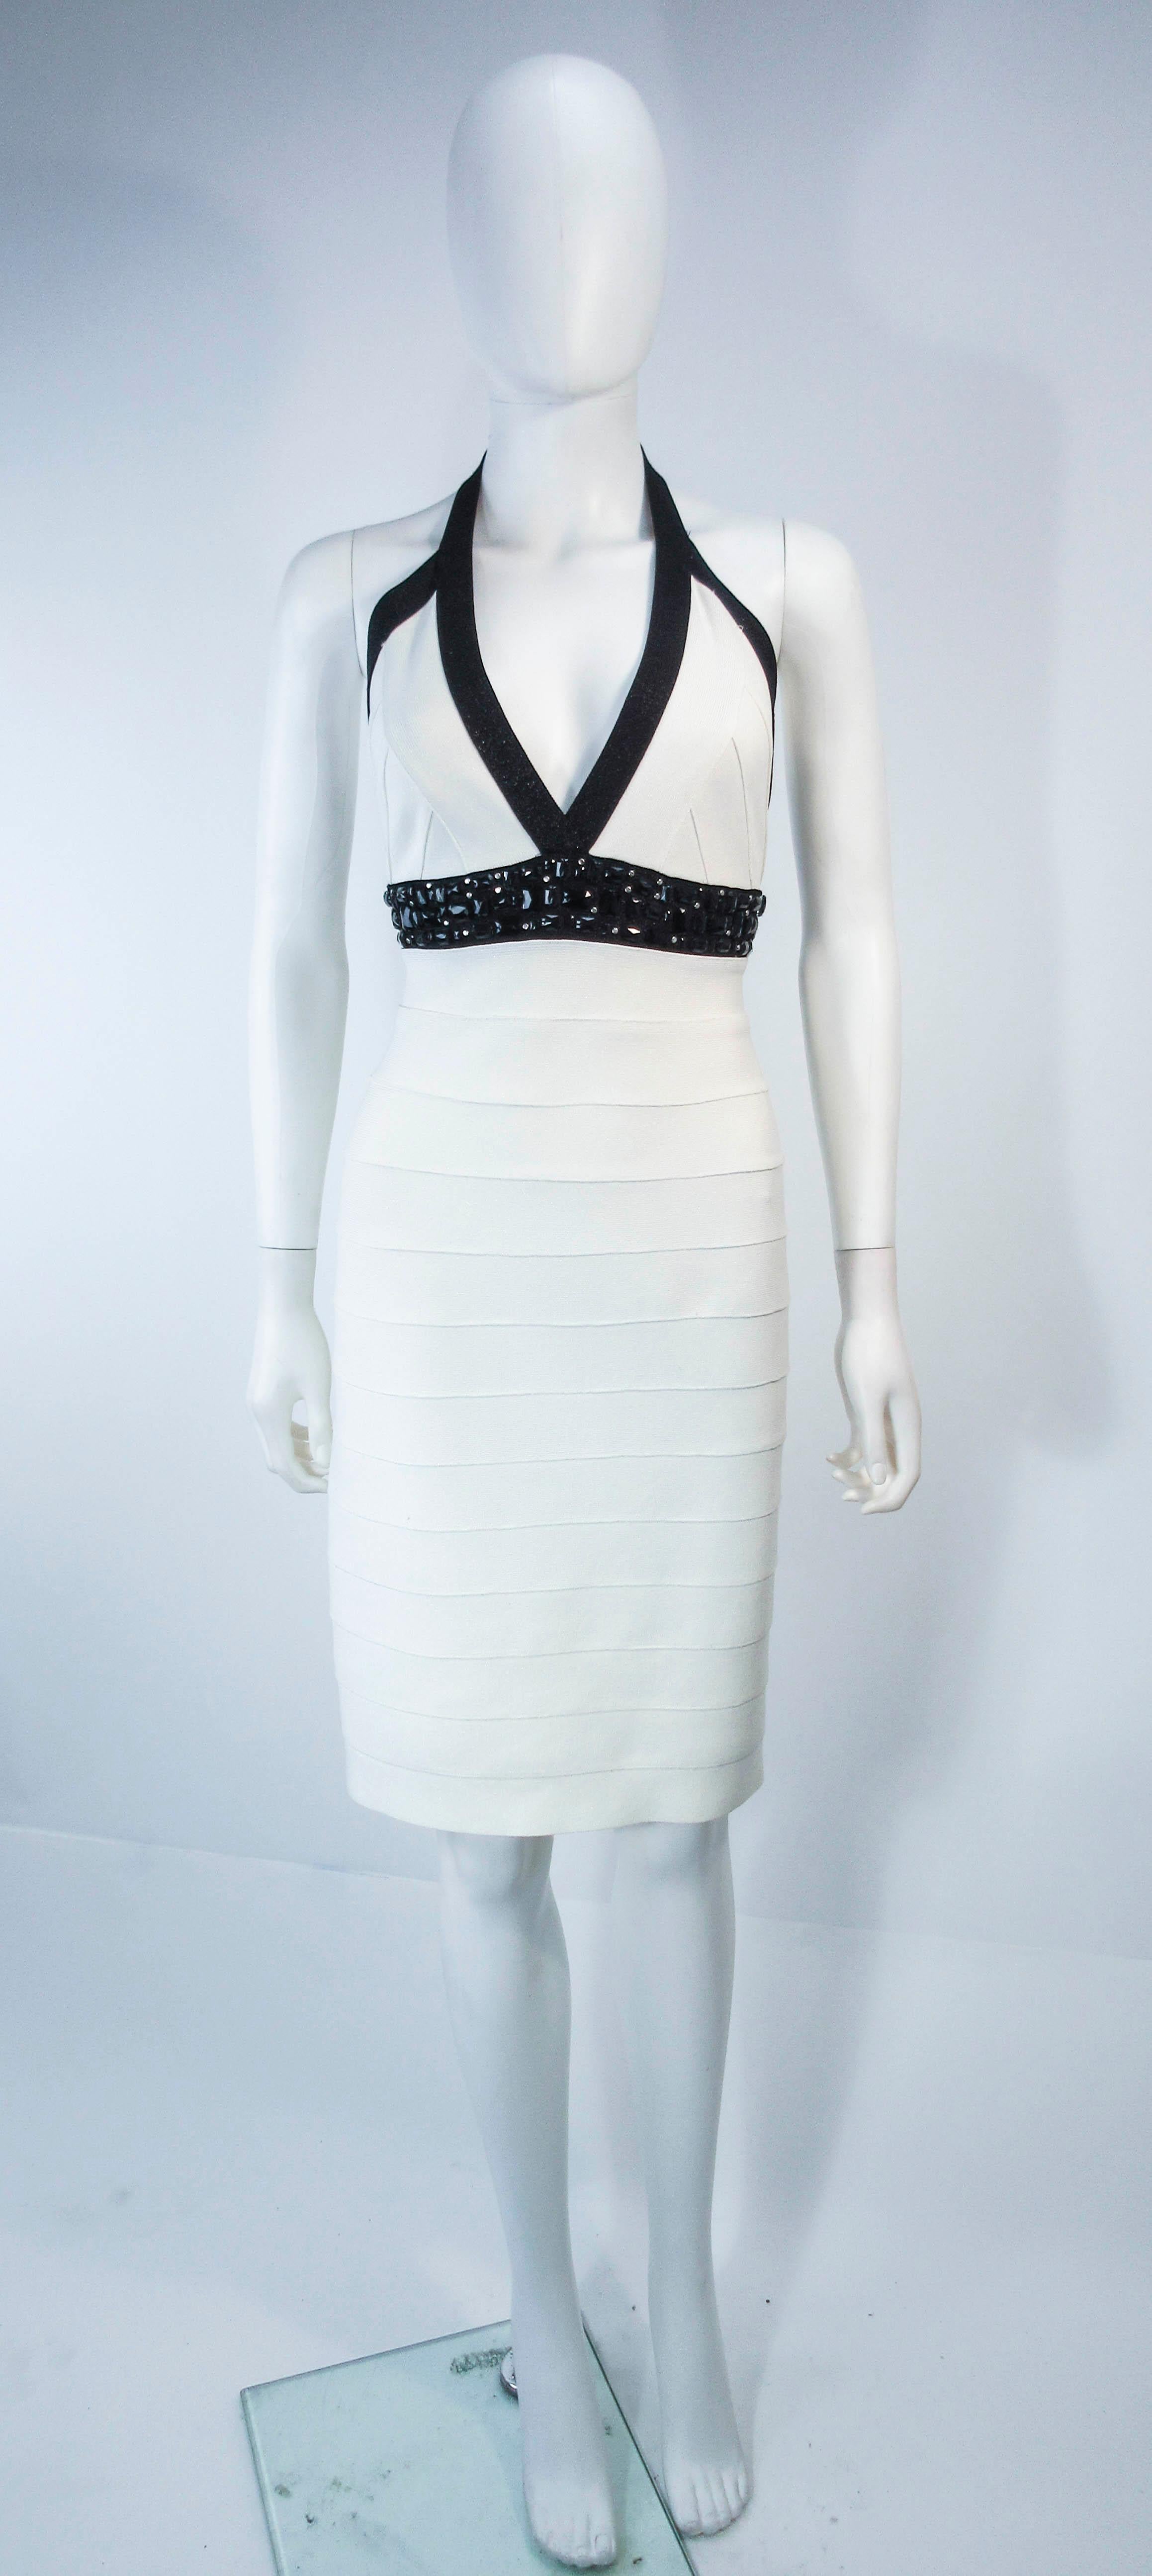 This Herve Leger is composed of a white metallic elastic with black trimming. Features a beaded empire waist. There is a center back zipper closure. In excellent pre-owned condition, some wear (see photos). 

**Please cross-reference measurements